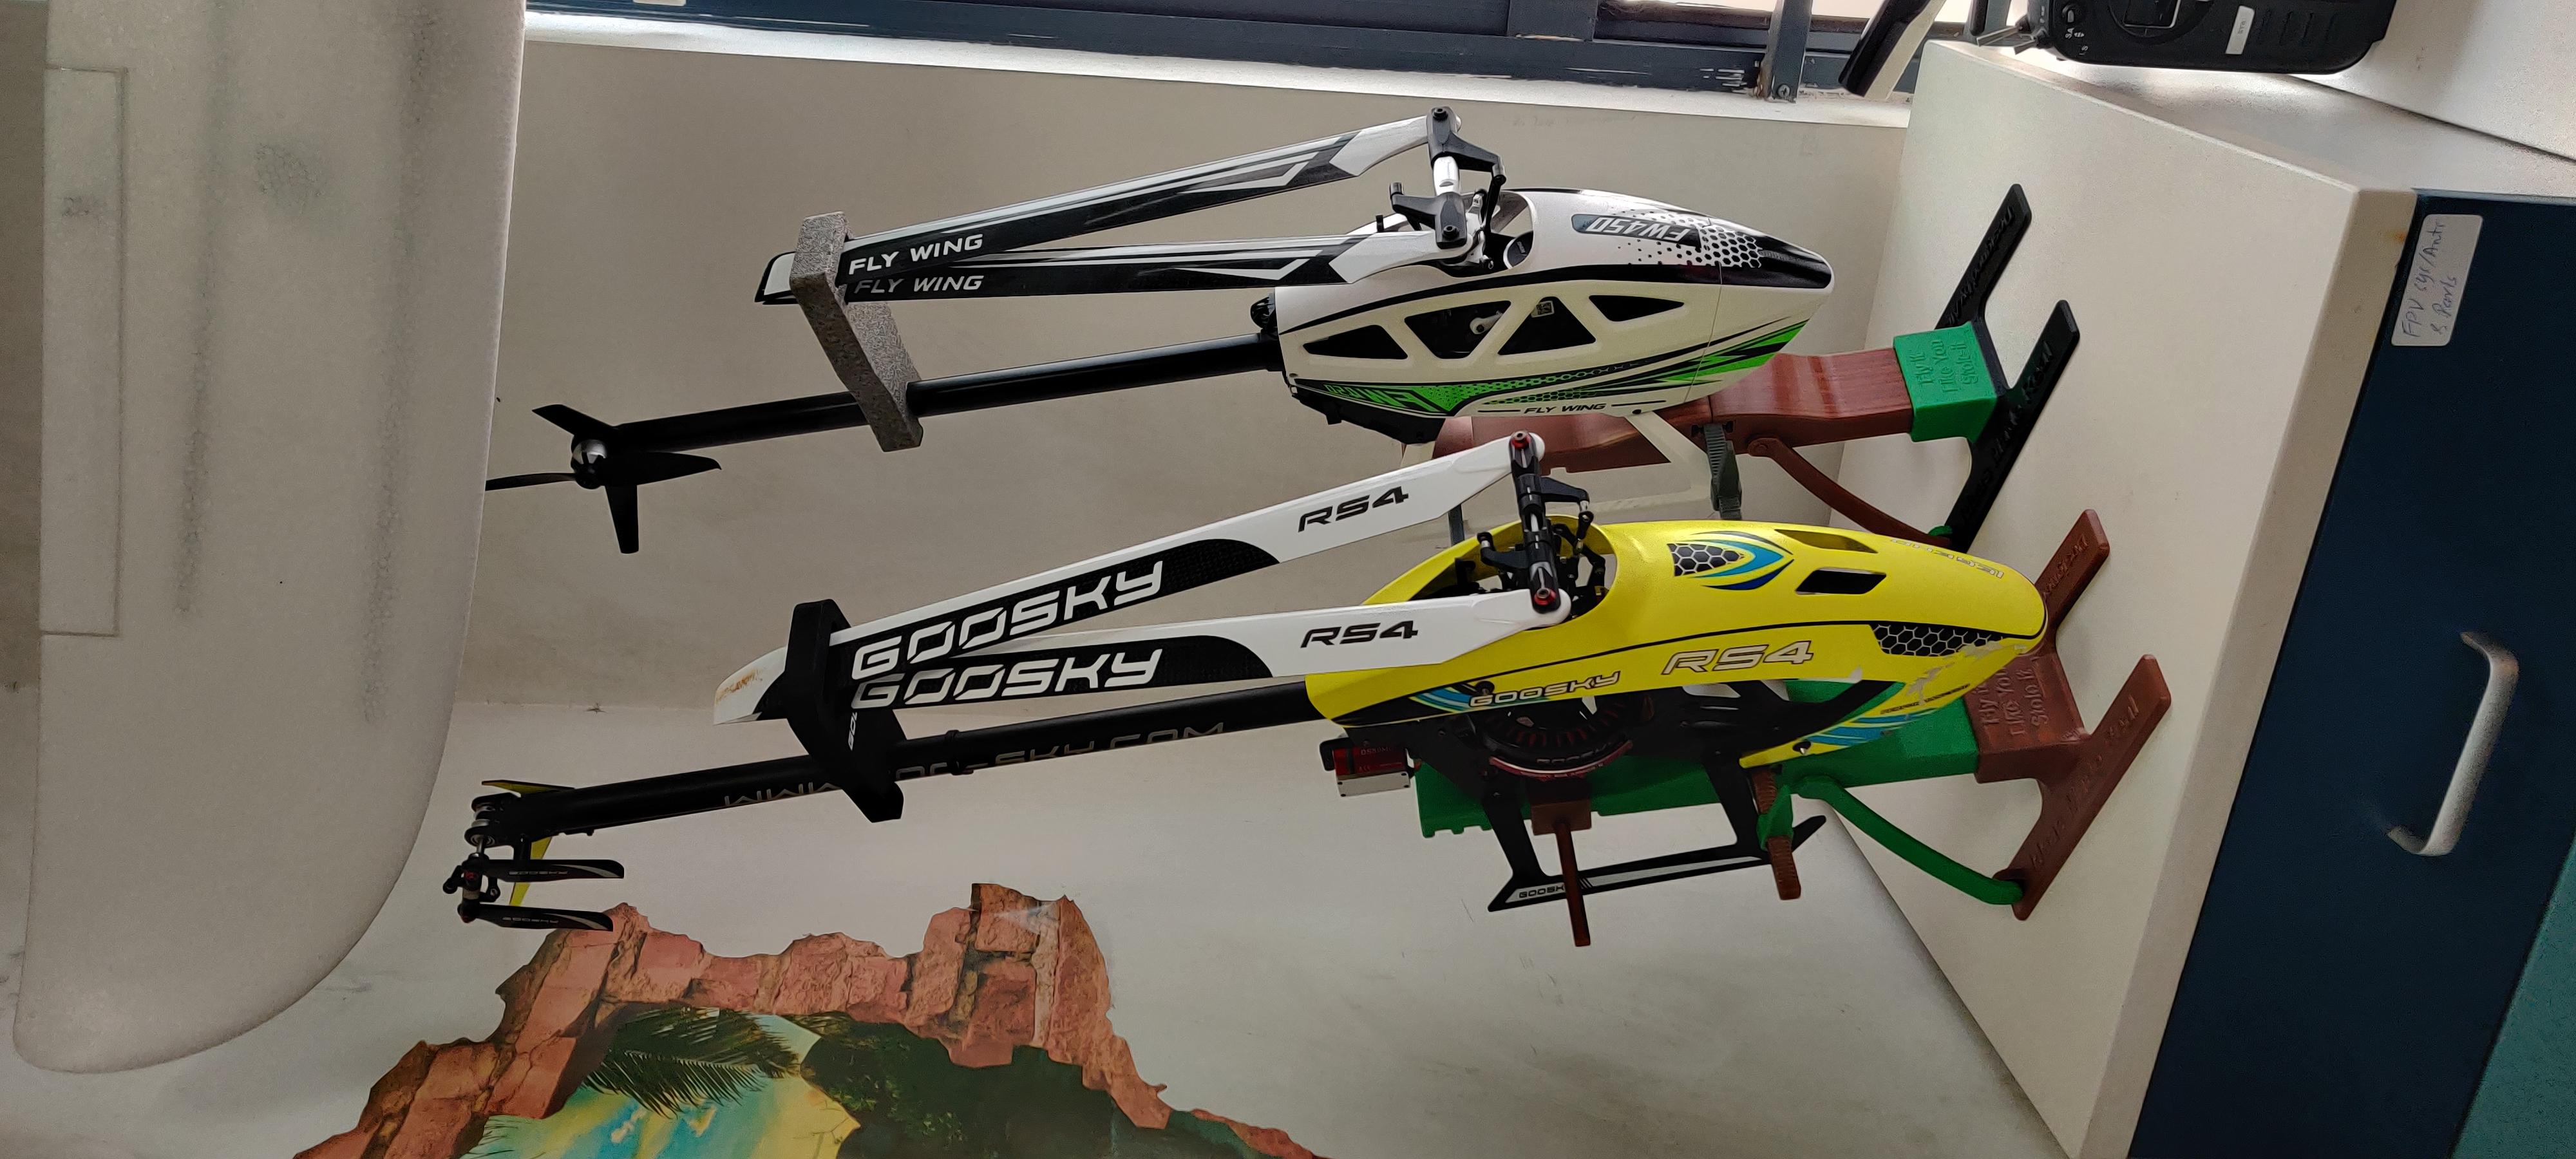 3D Printed Rc Helicopter: Unique and Customizable: Explore the World of 3D Printed RC Helicopter Designs 